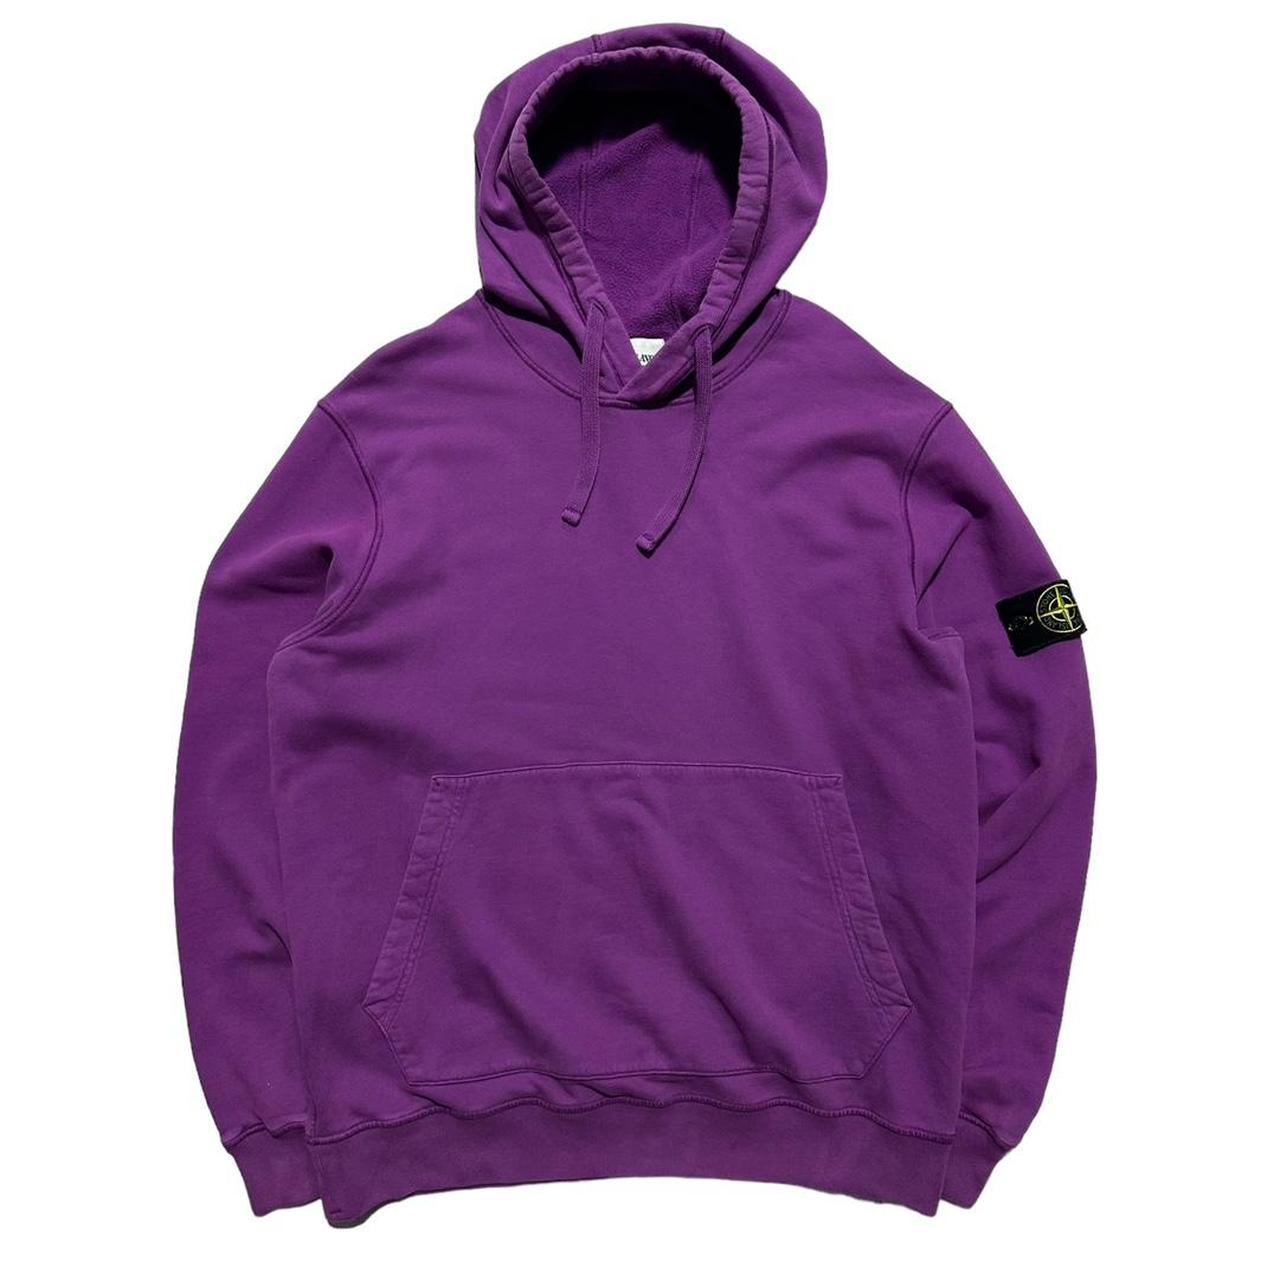 Stone Island Purple Pullover Hoodie - Known Source